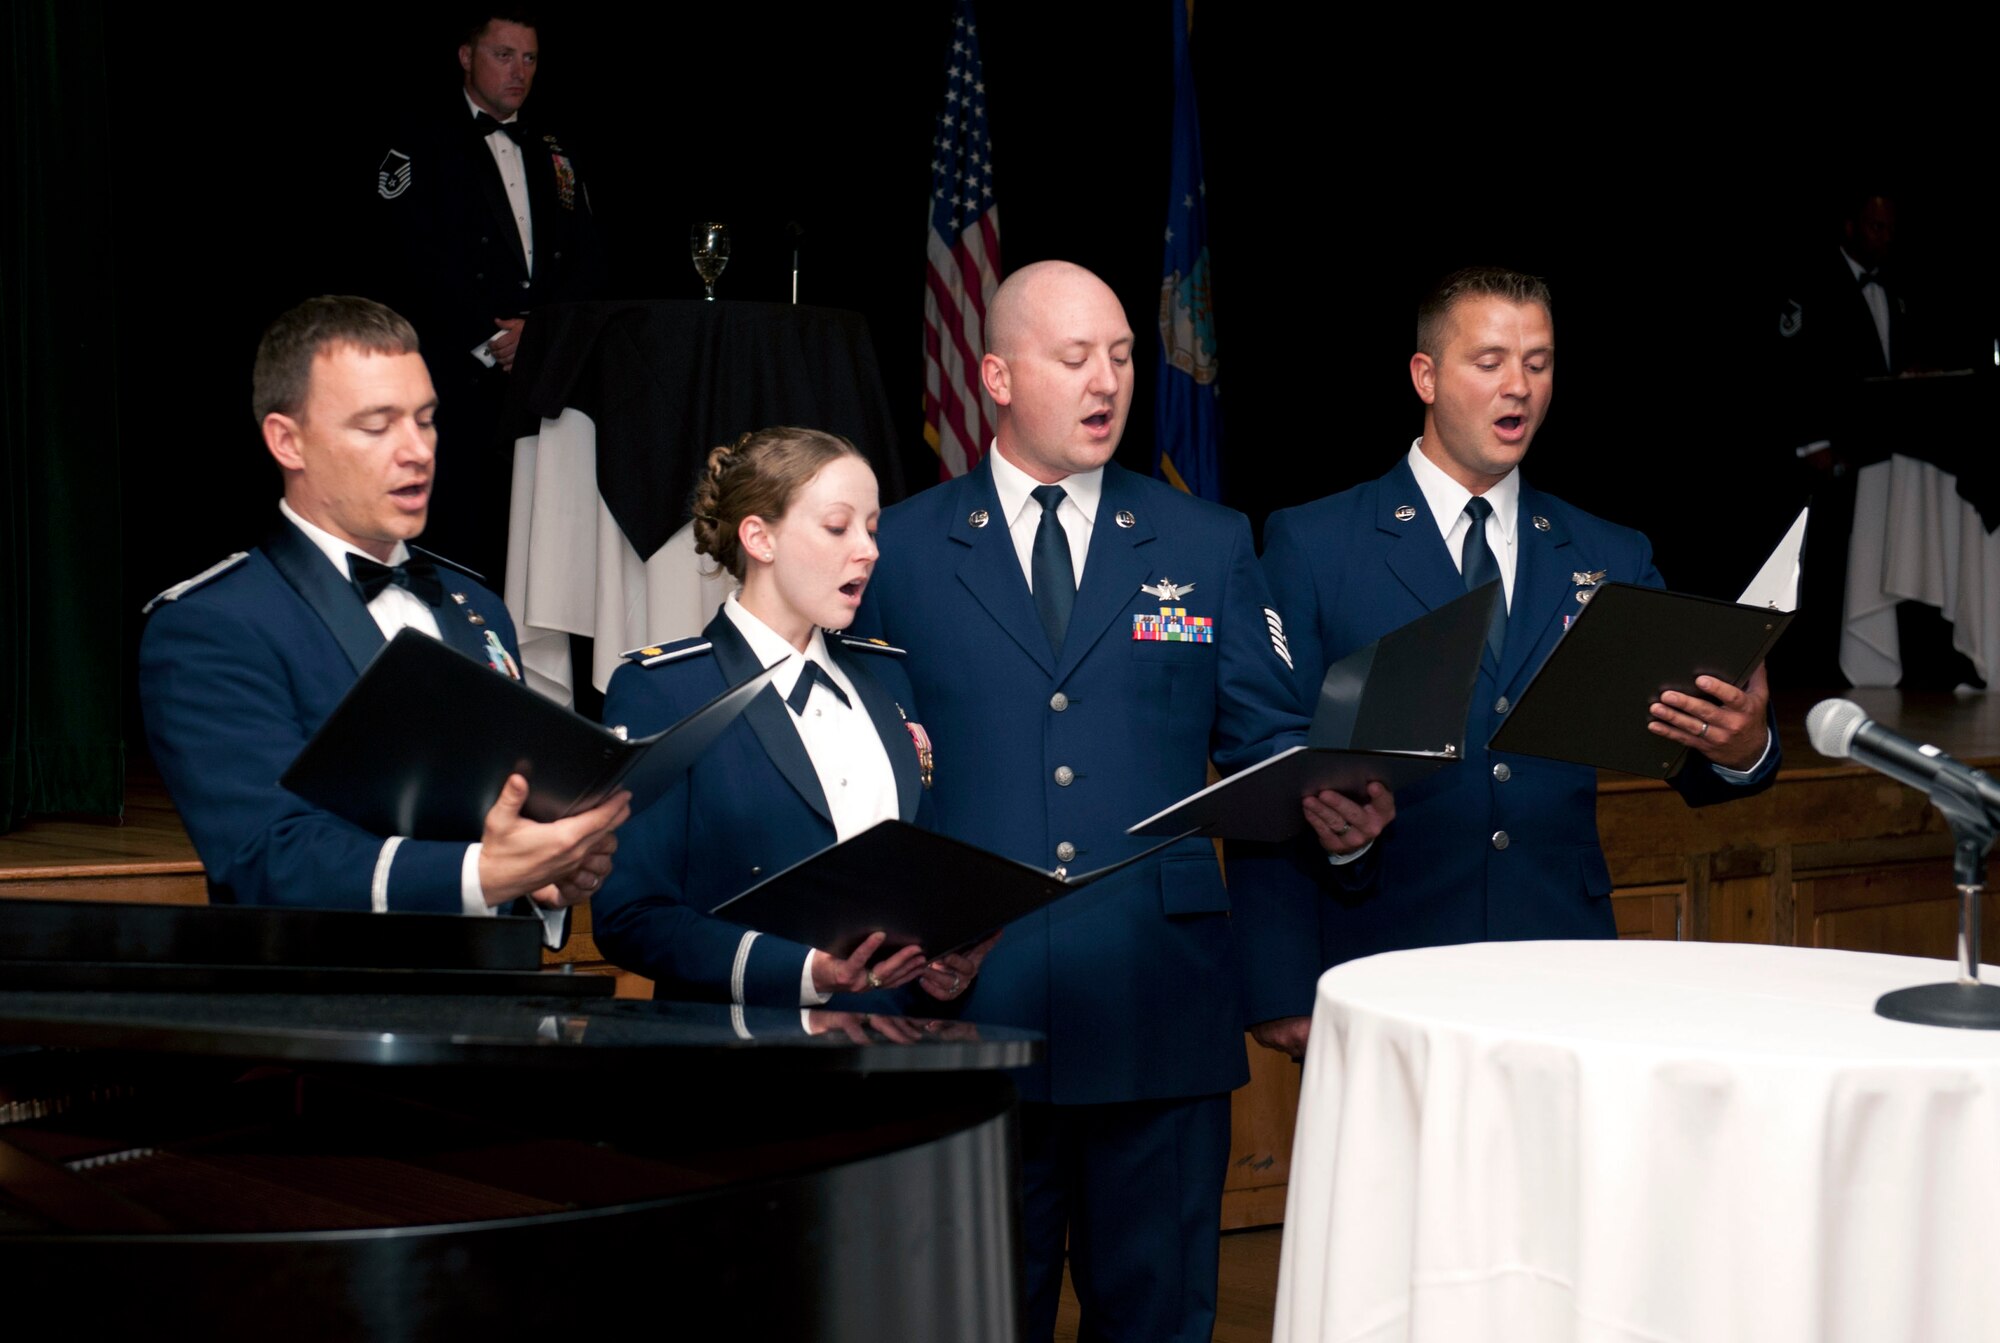 From left, Capt. Jason Parsons, Maj. Sarah Ford, Tech. Sgt. Jeff Achuff and Senior Airman James Baumgartner, all members of the 8th Space Warning Squadron singing group, perform at the Senior NCO Induction Ceremony Aug. 22, 2014, at the Heritage Eagle Bend Golf Club in Aurora, Colo. The group comprises 8th Space Warning Squadron members who perform the national anthem and other songs for military events and ceremonies. (U.S. Air Force photo by Airman 1st Class Samantha Saulsbury/Released)